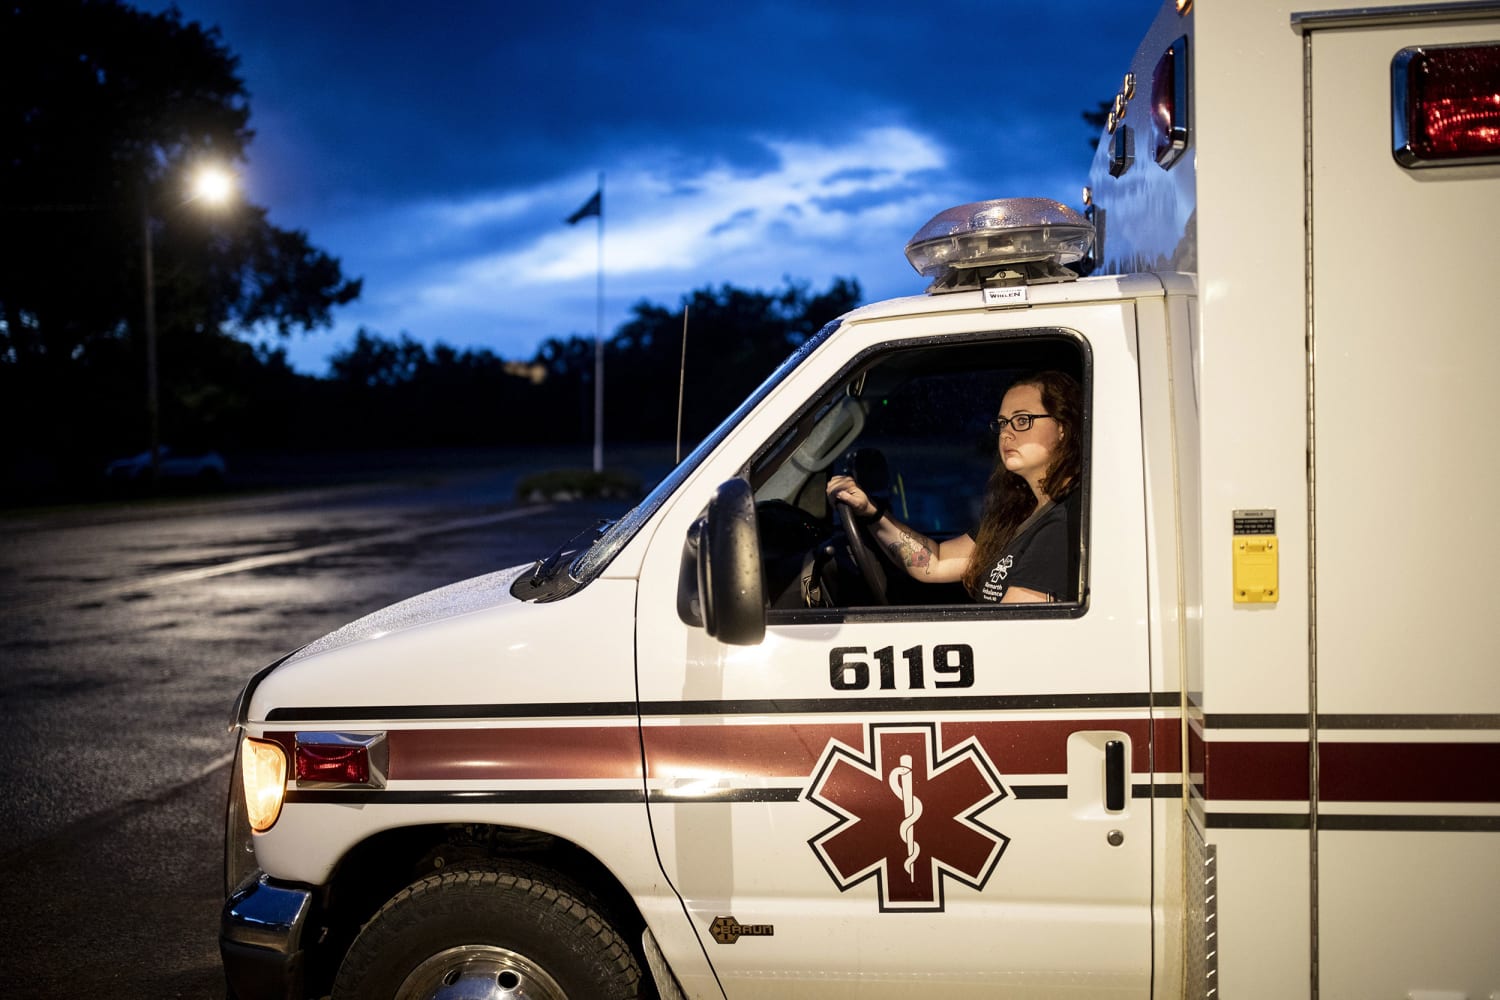 There's shortage of volunteer EMS workers for ambulances in rural America